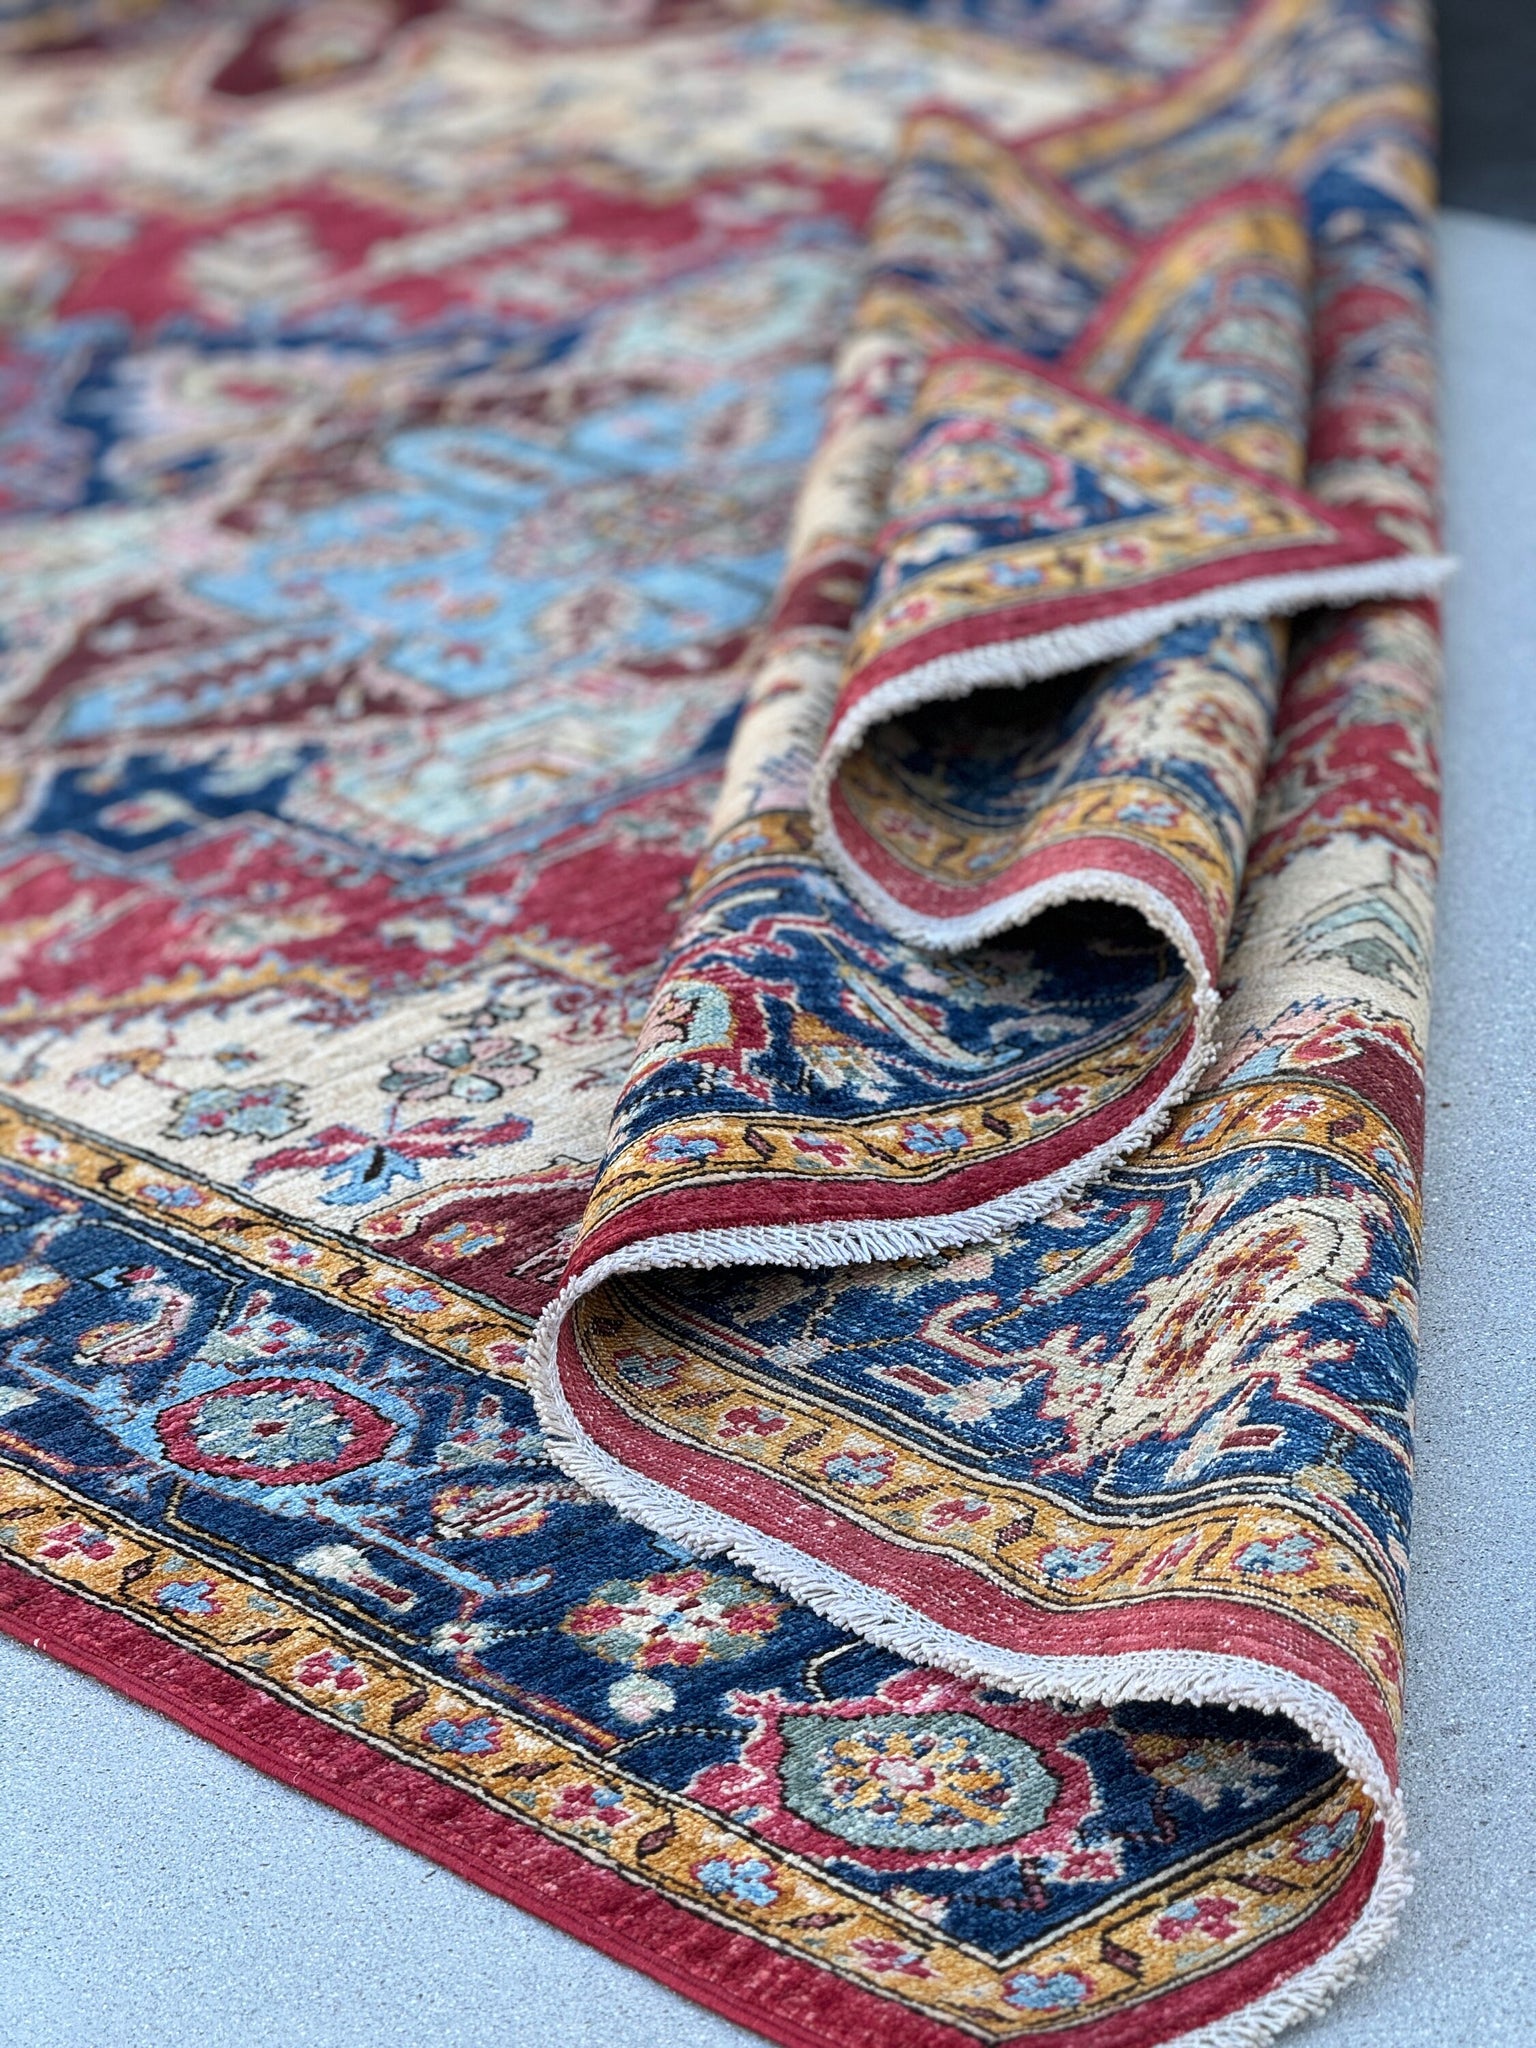 6x9 (180x274) Hand Knotted Afghan Rug | Cherry Red Sapphire Sky Navy Blue Beige Gold Cream Olive Green Rose Pink Mustard Yellow | Wool Heriz